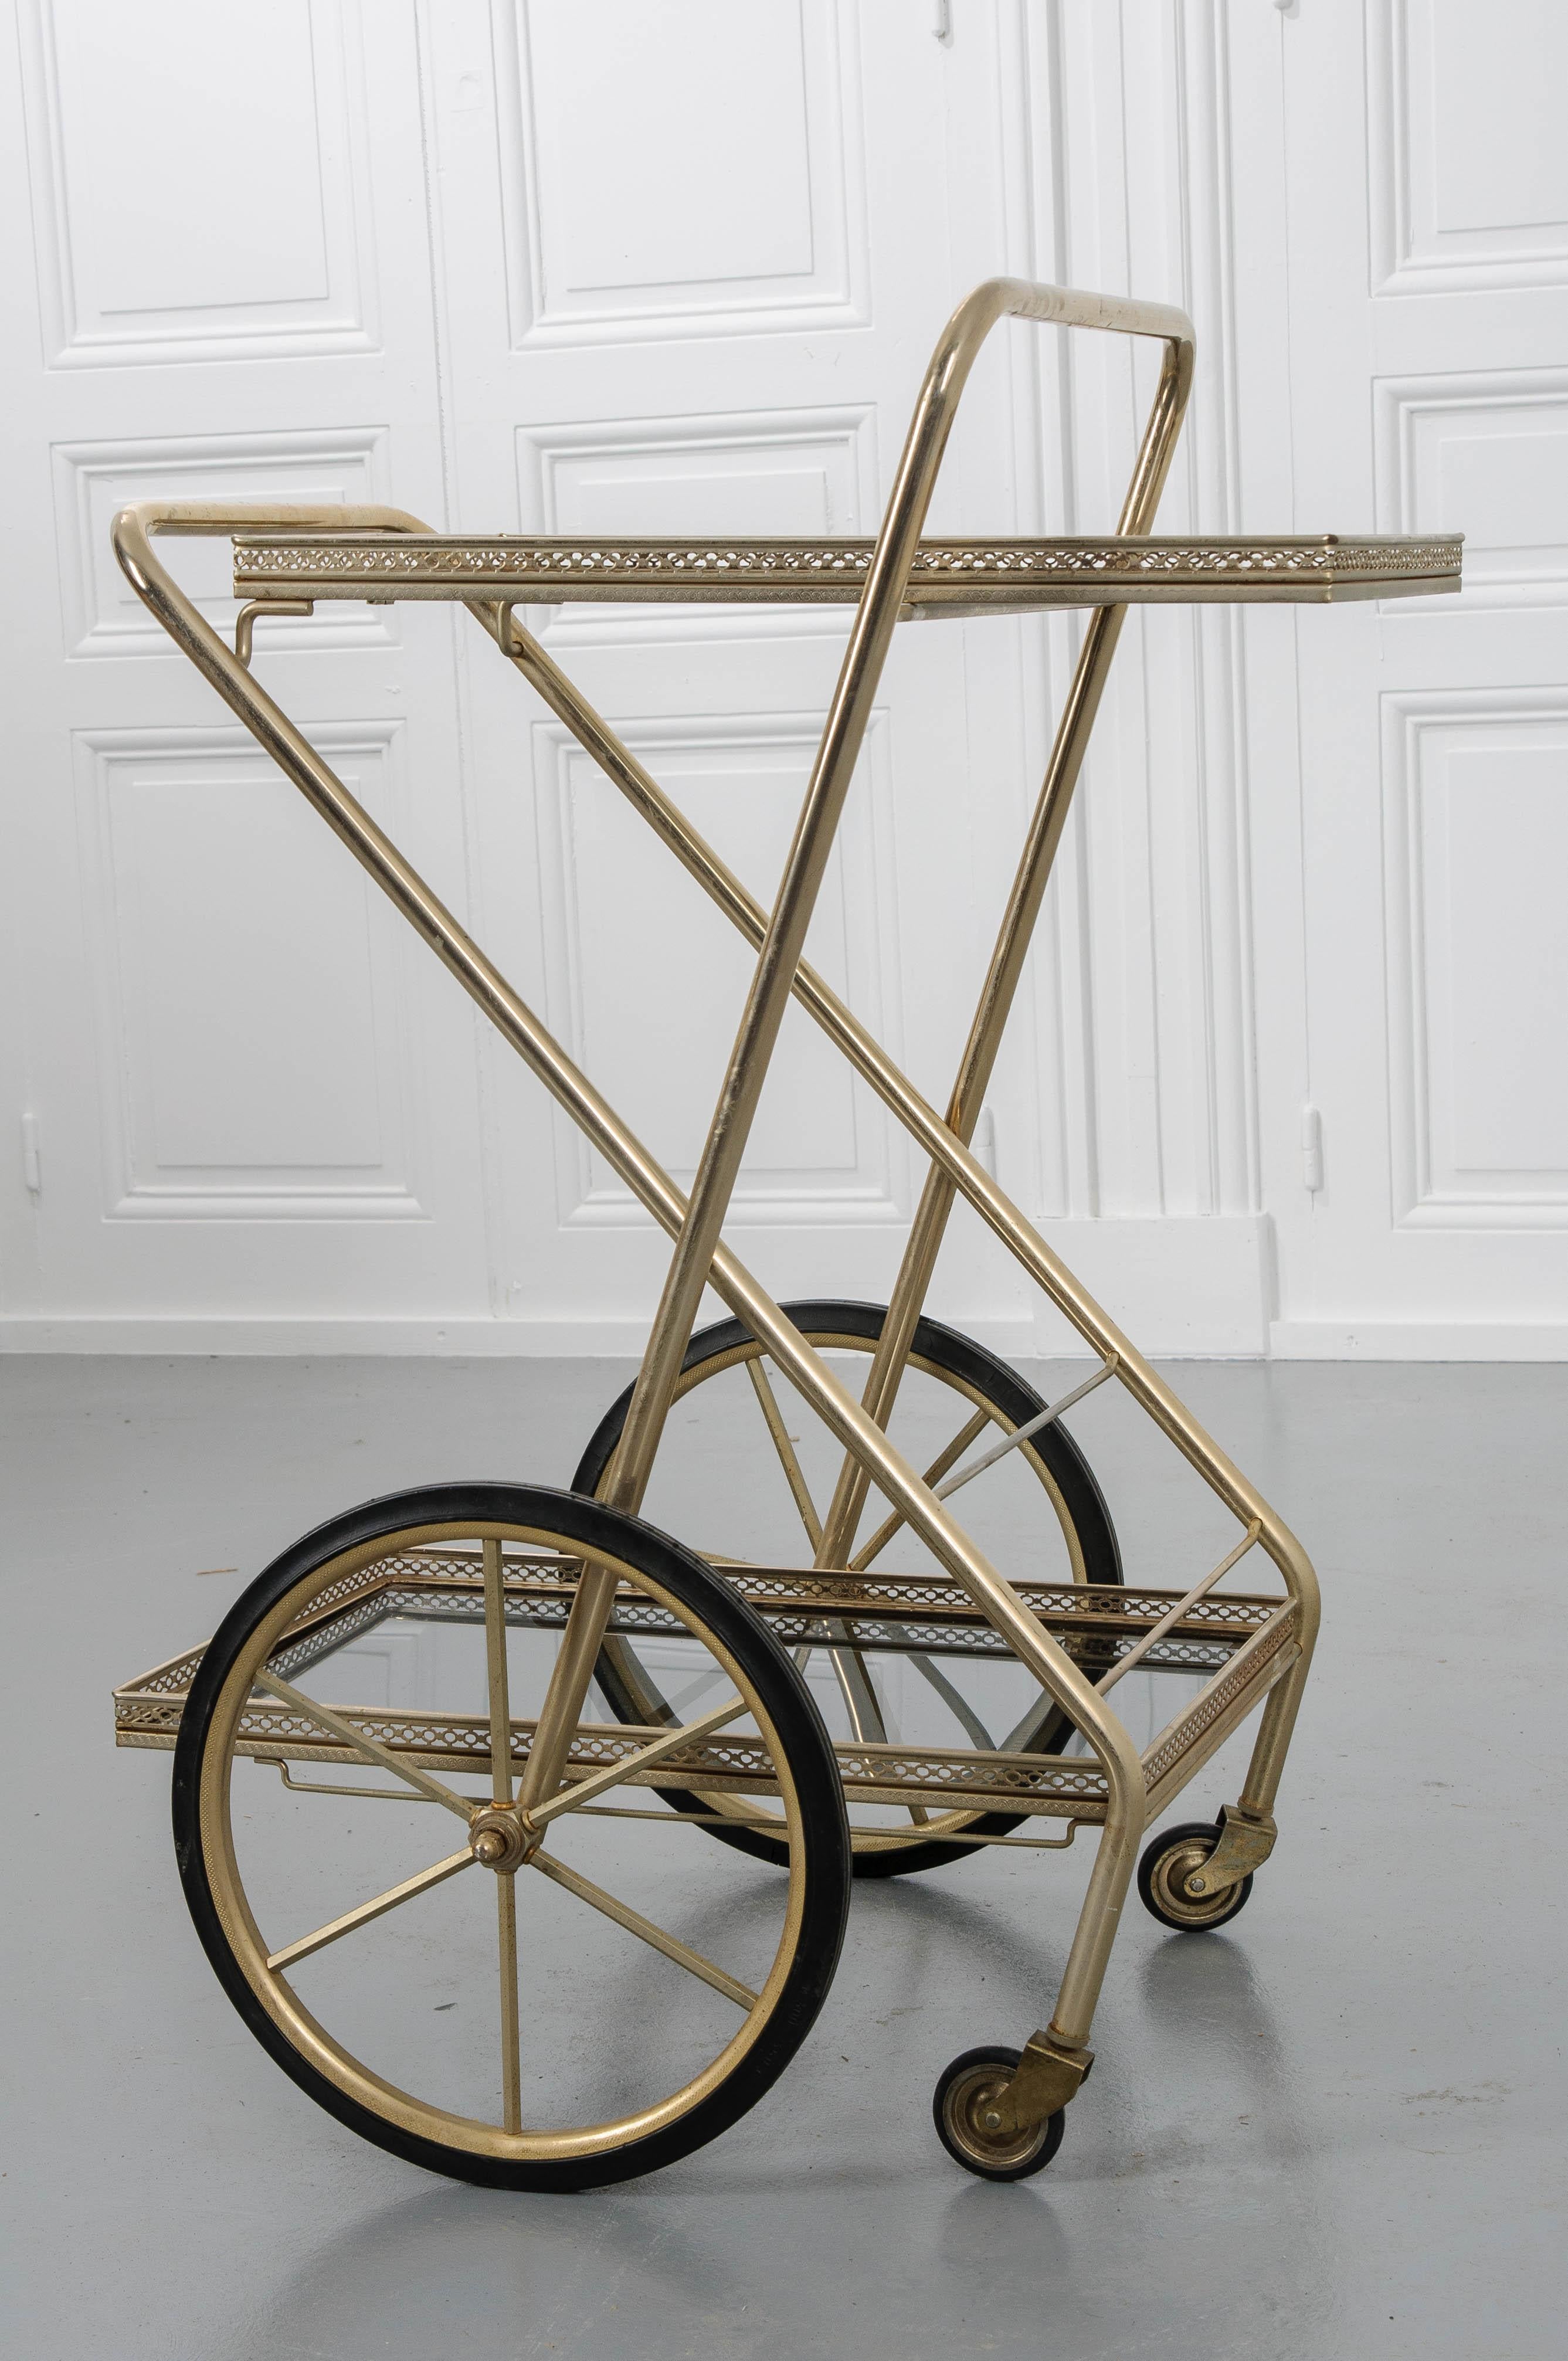 At first glance, this French neoclassical-styled brass plated bar cart looks like many of the other beautiful antique trolleys and service carts that grace many of today’s well-appointed homes. What makes this vintage cart special is its ability to